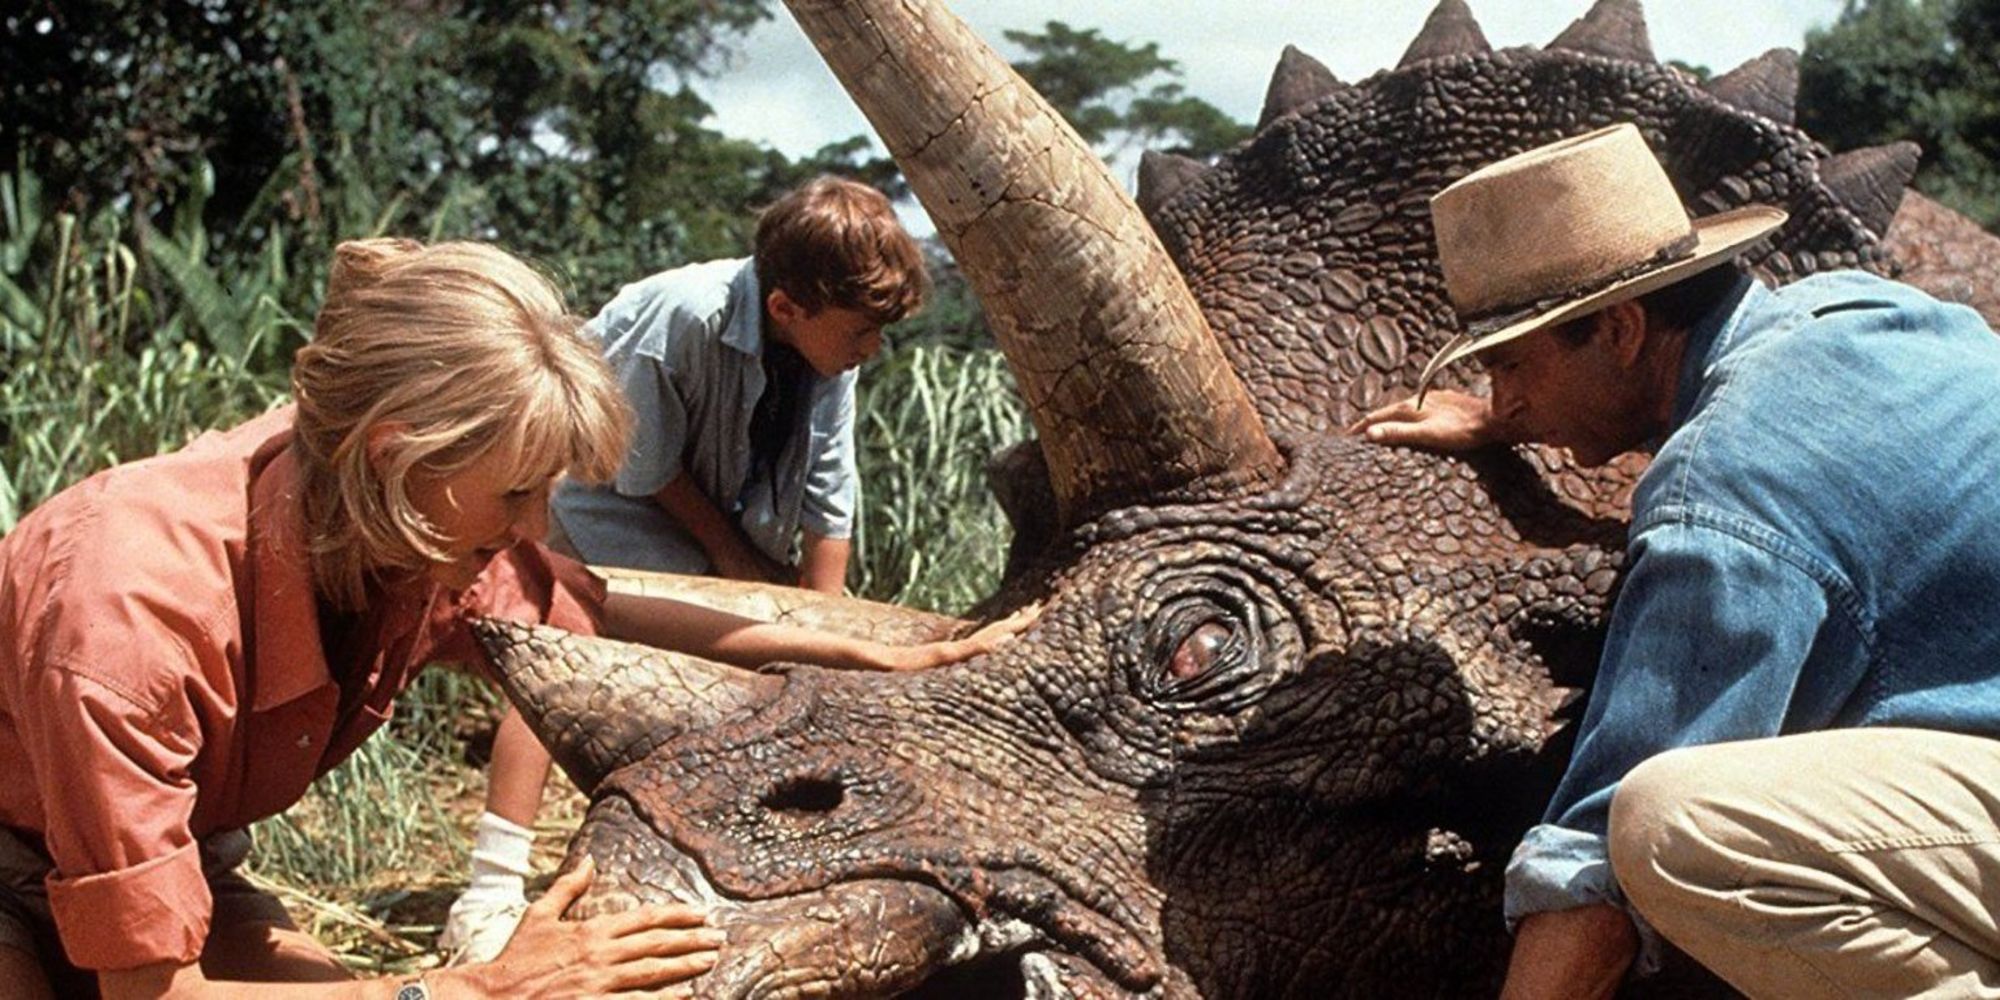 An image of Sam Neill sitting next to a Dinosaur